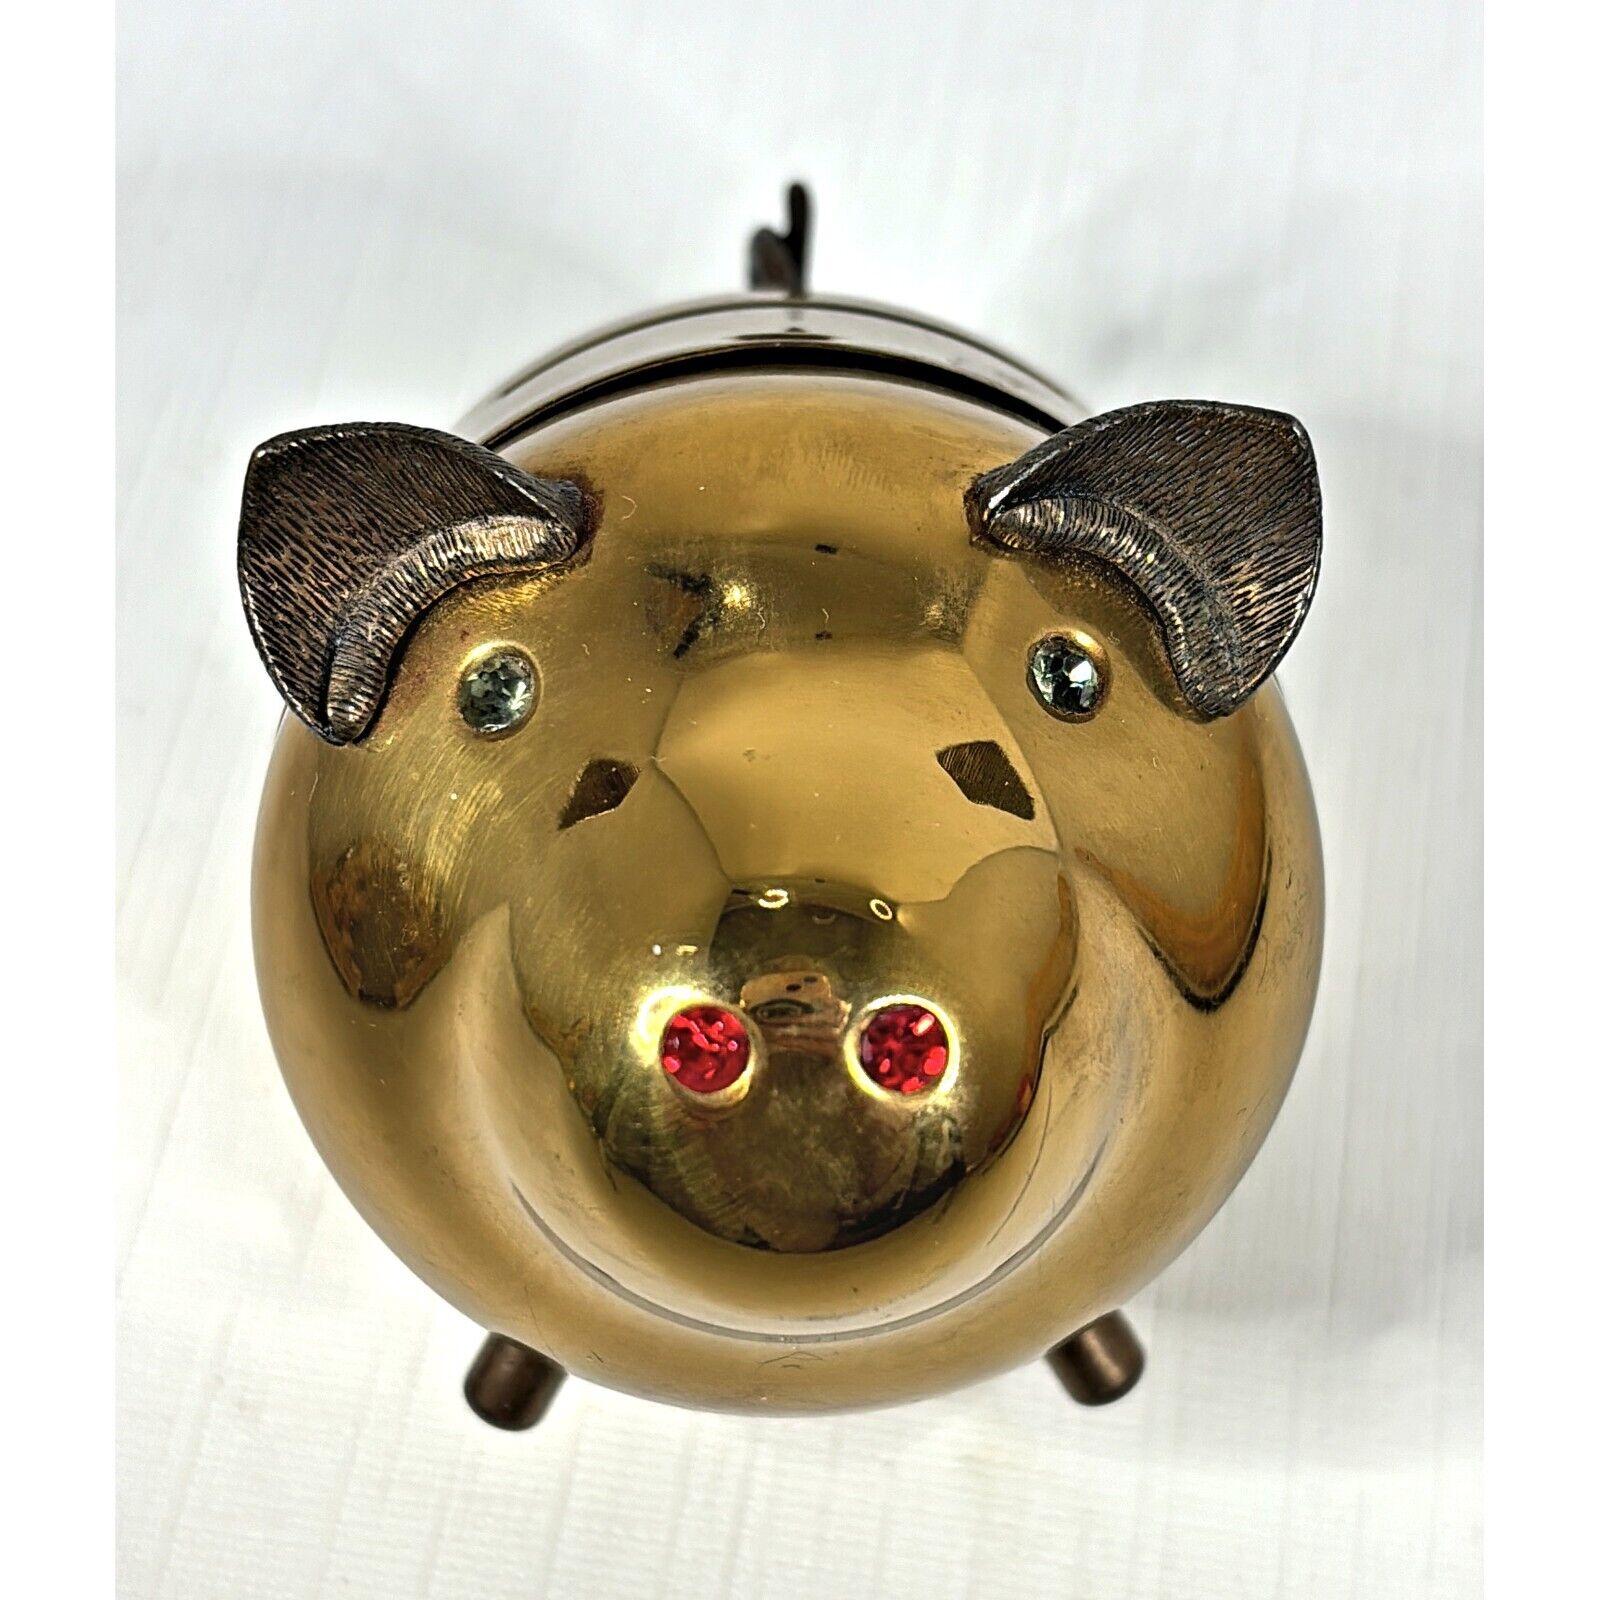 Metal Piggy Bank Rhinestone Eyes Jeweled Nose Pig Curly Tail Coin Gold Tone Vtg